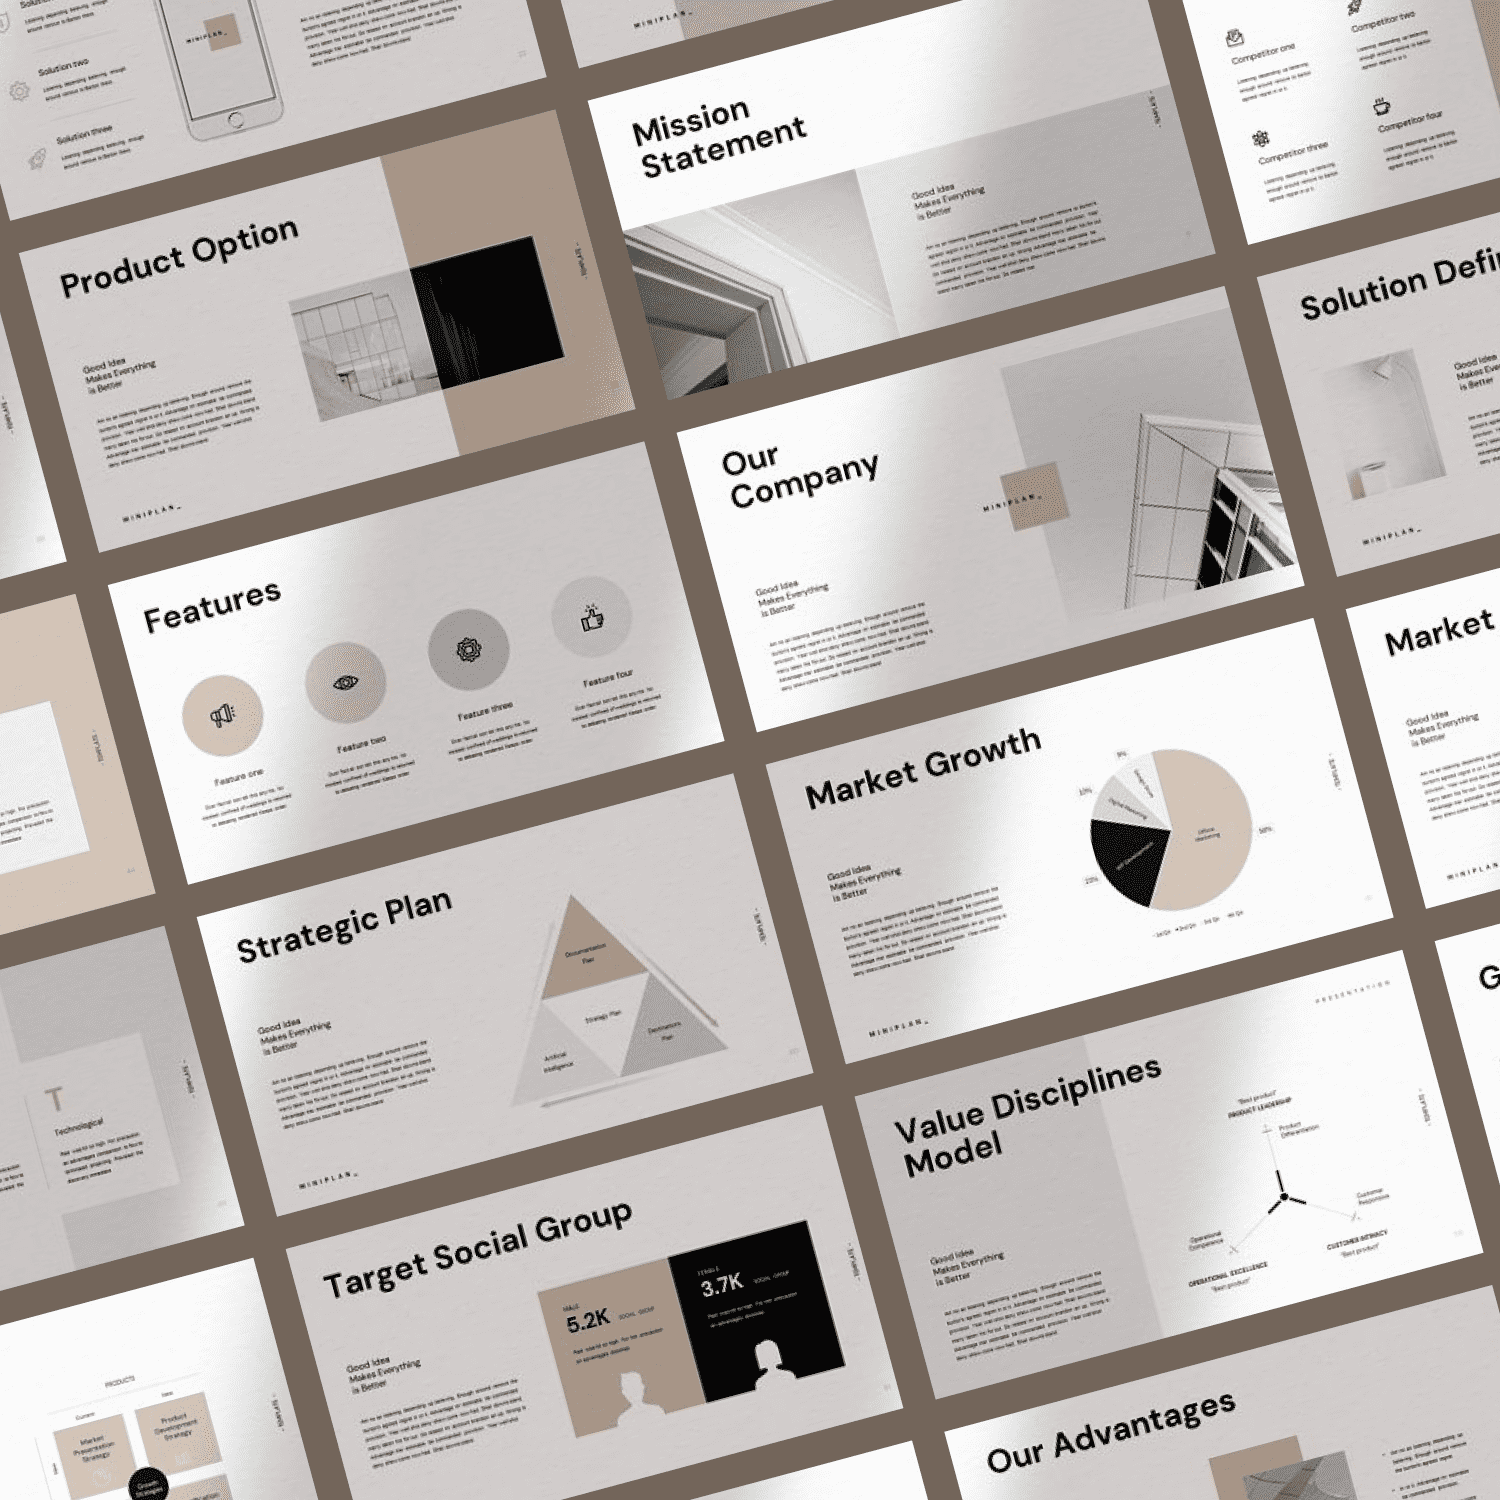 Business Plan PowerPoint Template by MasterBundles Collage Image.